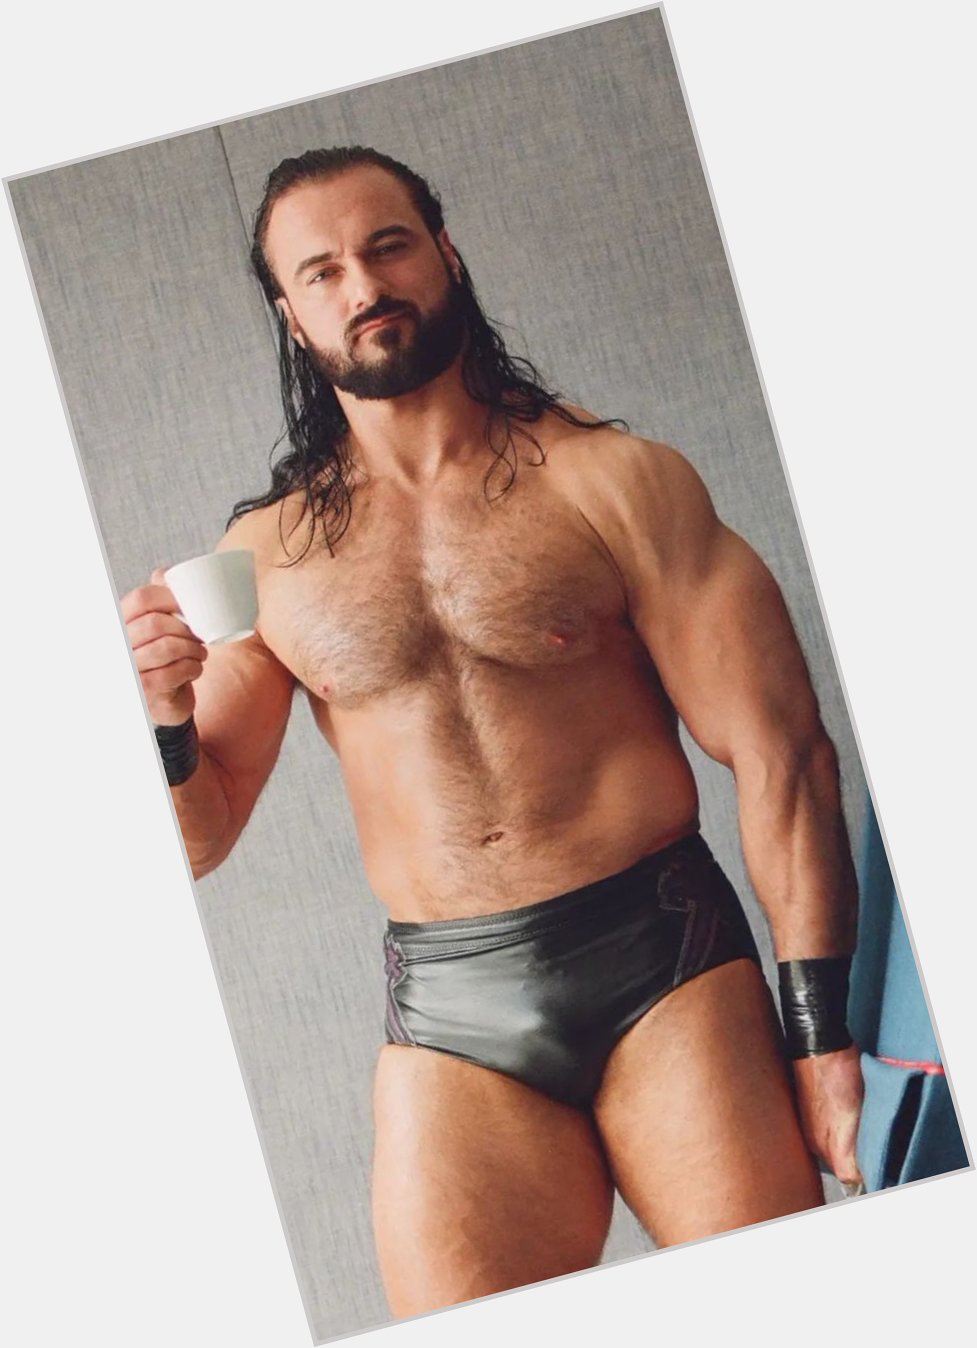 Happy birthday, to all Drew McIntyre roleplayers. I hope you have wonderful day. 